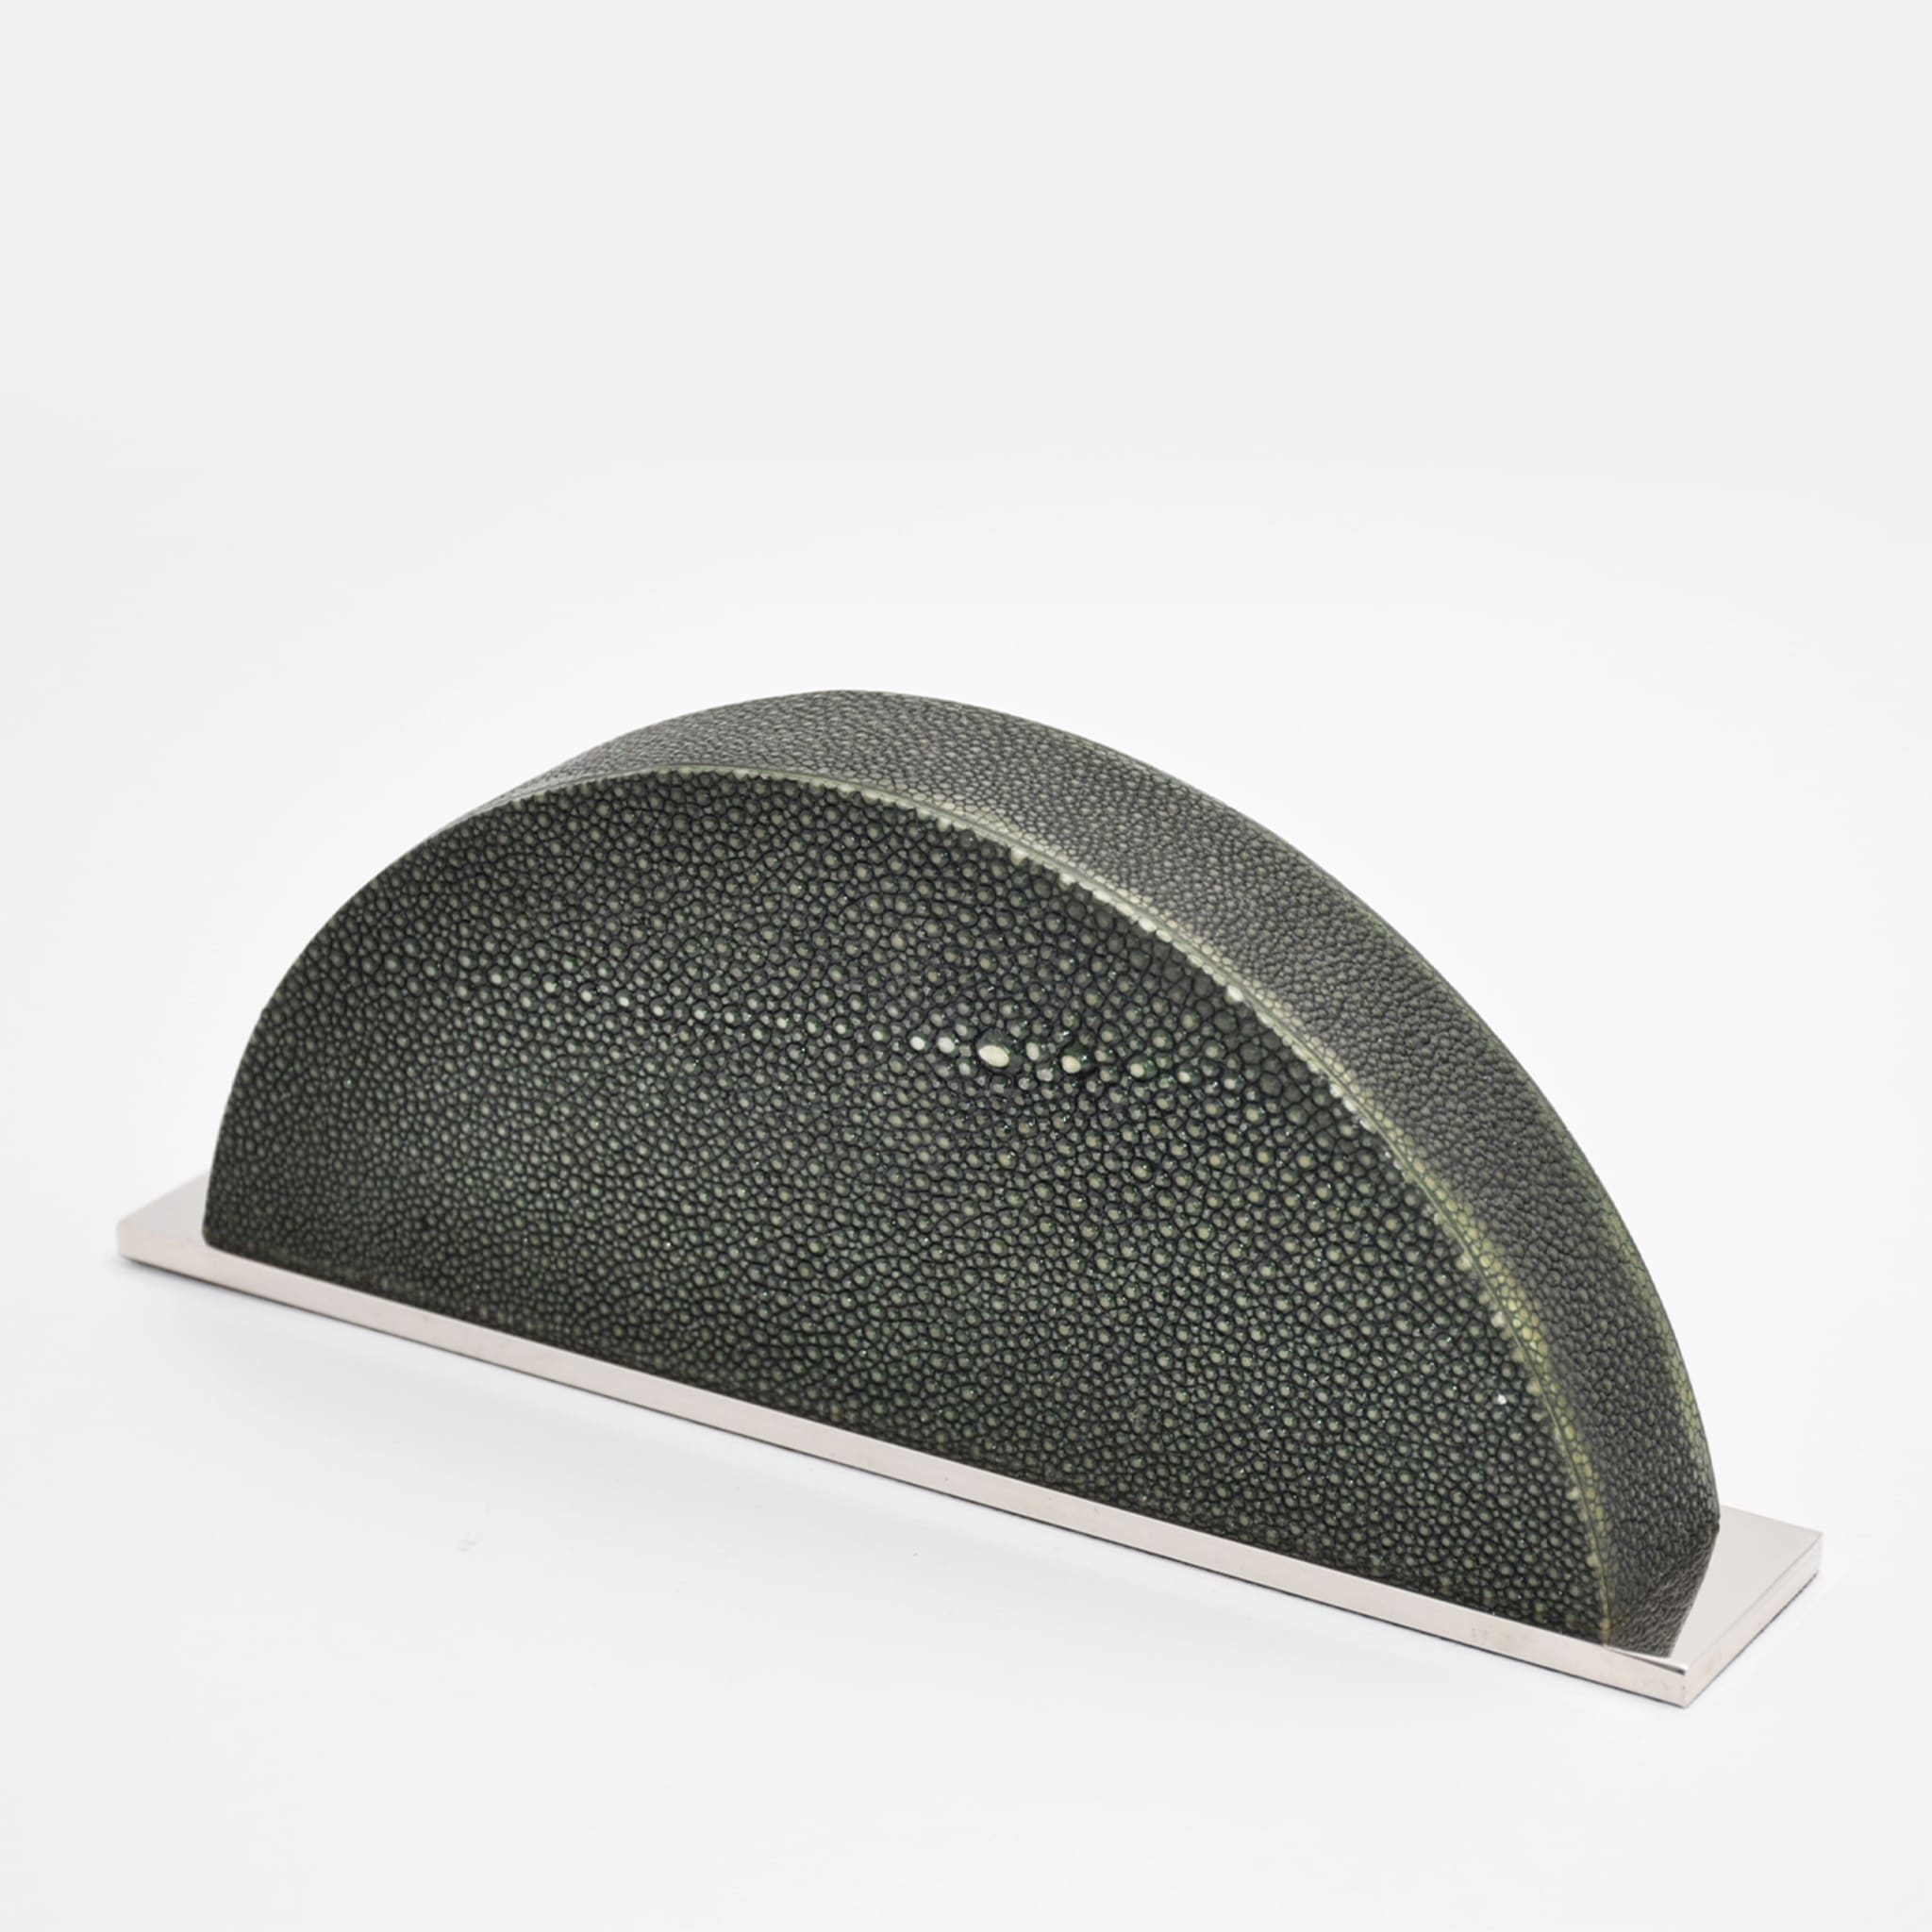 Galucharme Forest-Green Shagreen Table Clock by Nino Basso - Alternative view 2